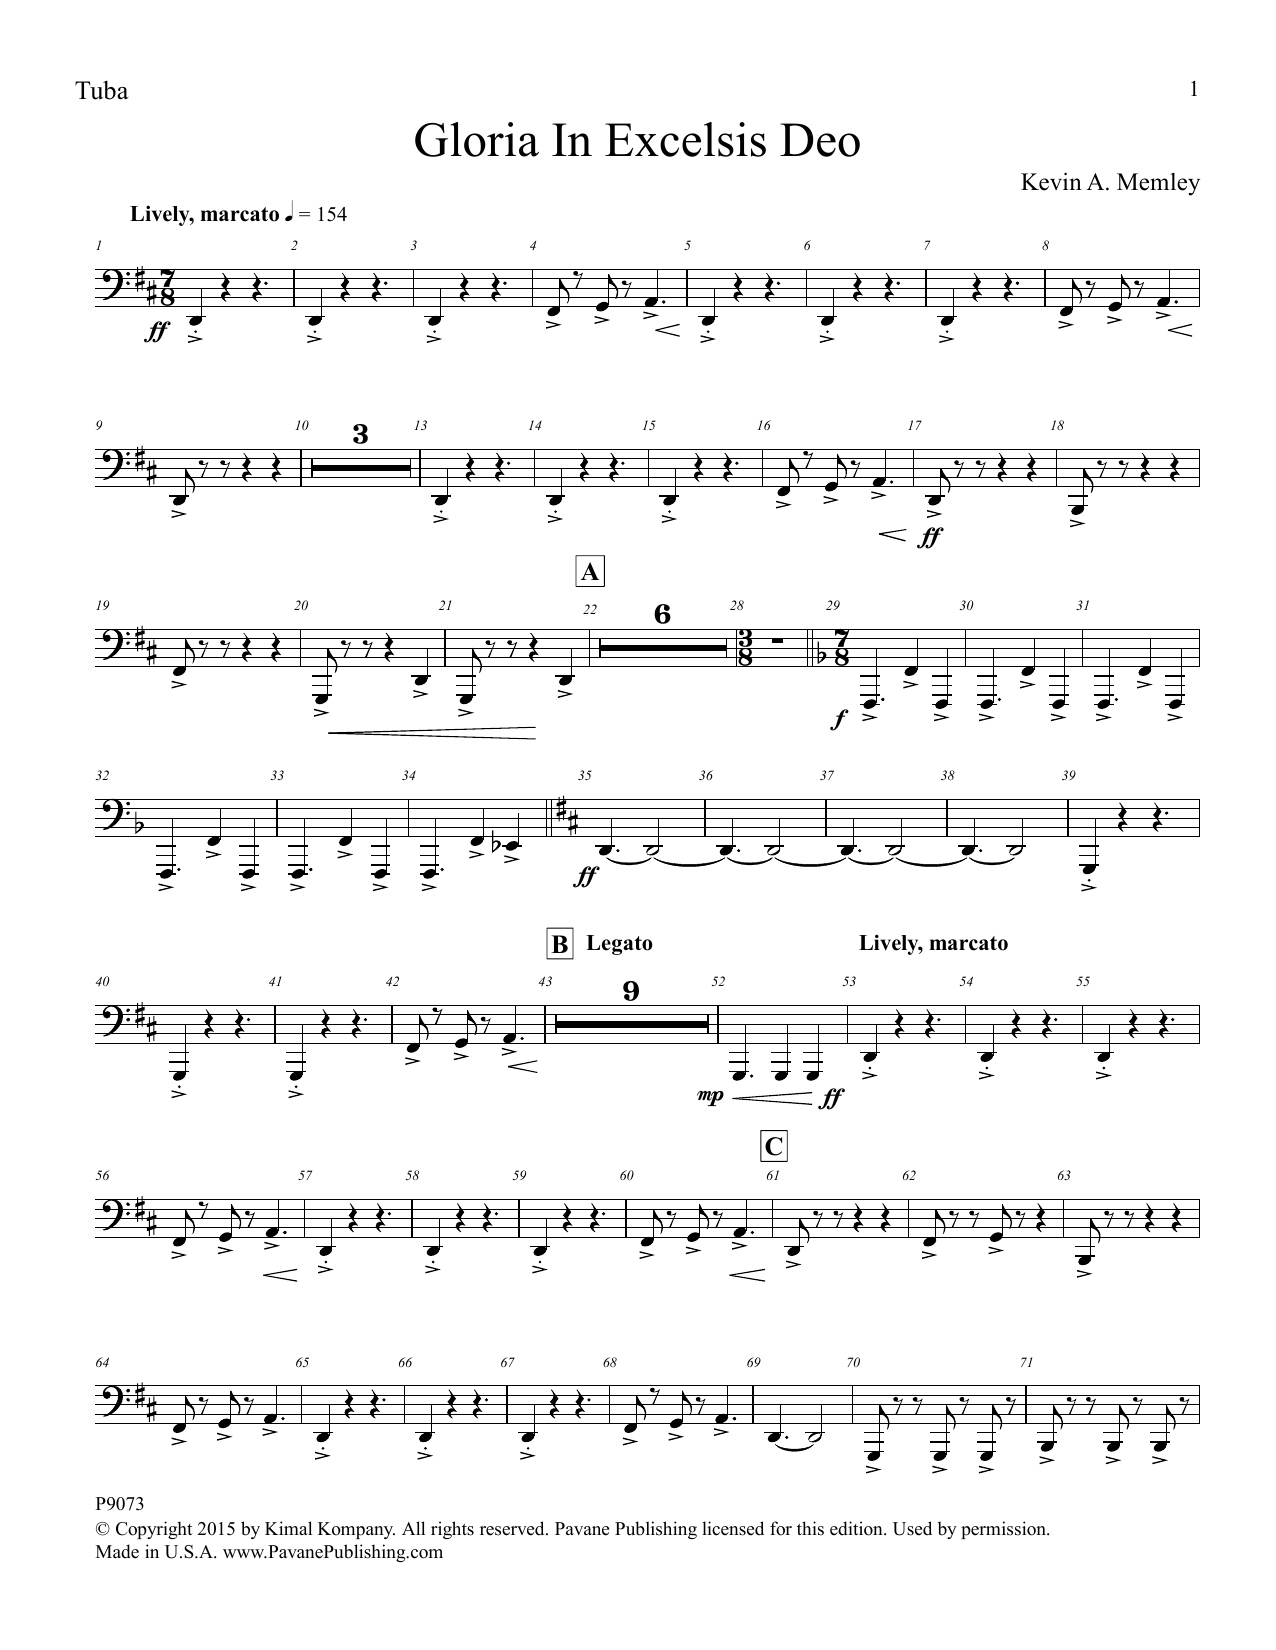 Download Kevin A. Memley Gloria in Excelsis Deo - Tuba Sheet Music